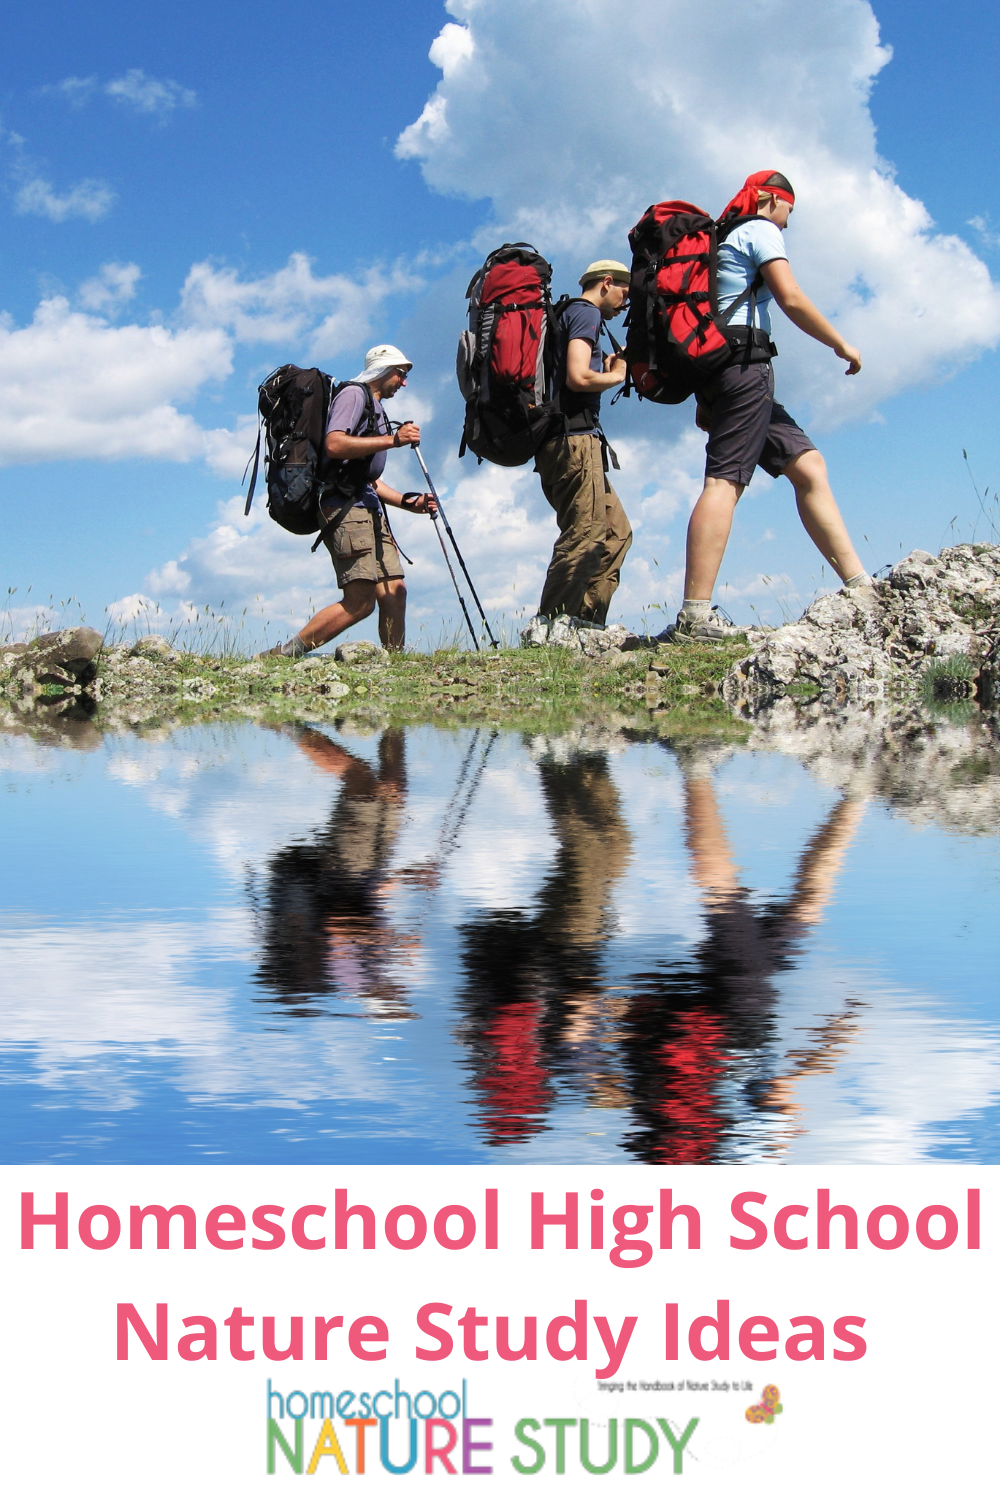 These homeschool high school nature study ideas are meant to encourage your family to consider continuing with some natural science even in the teen years.